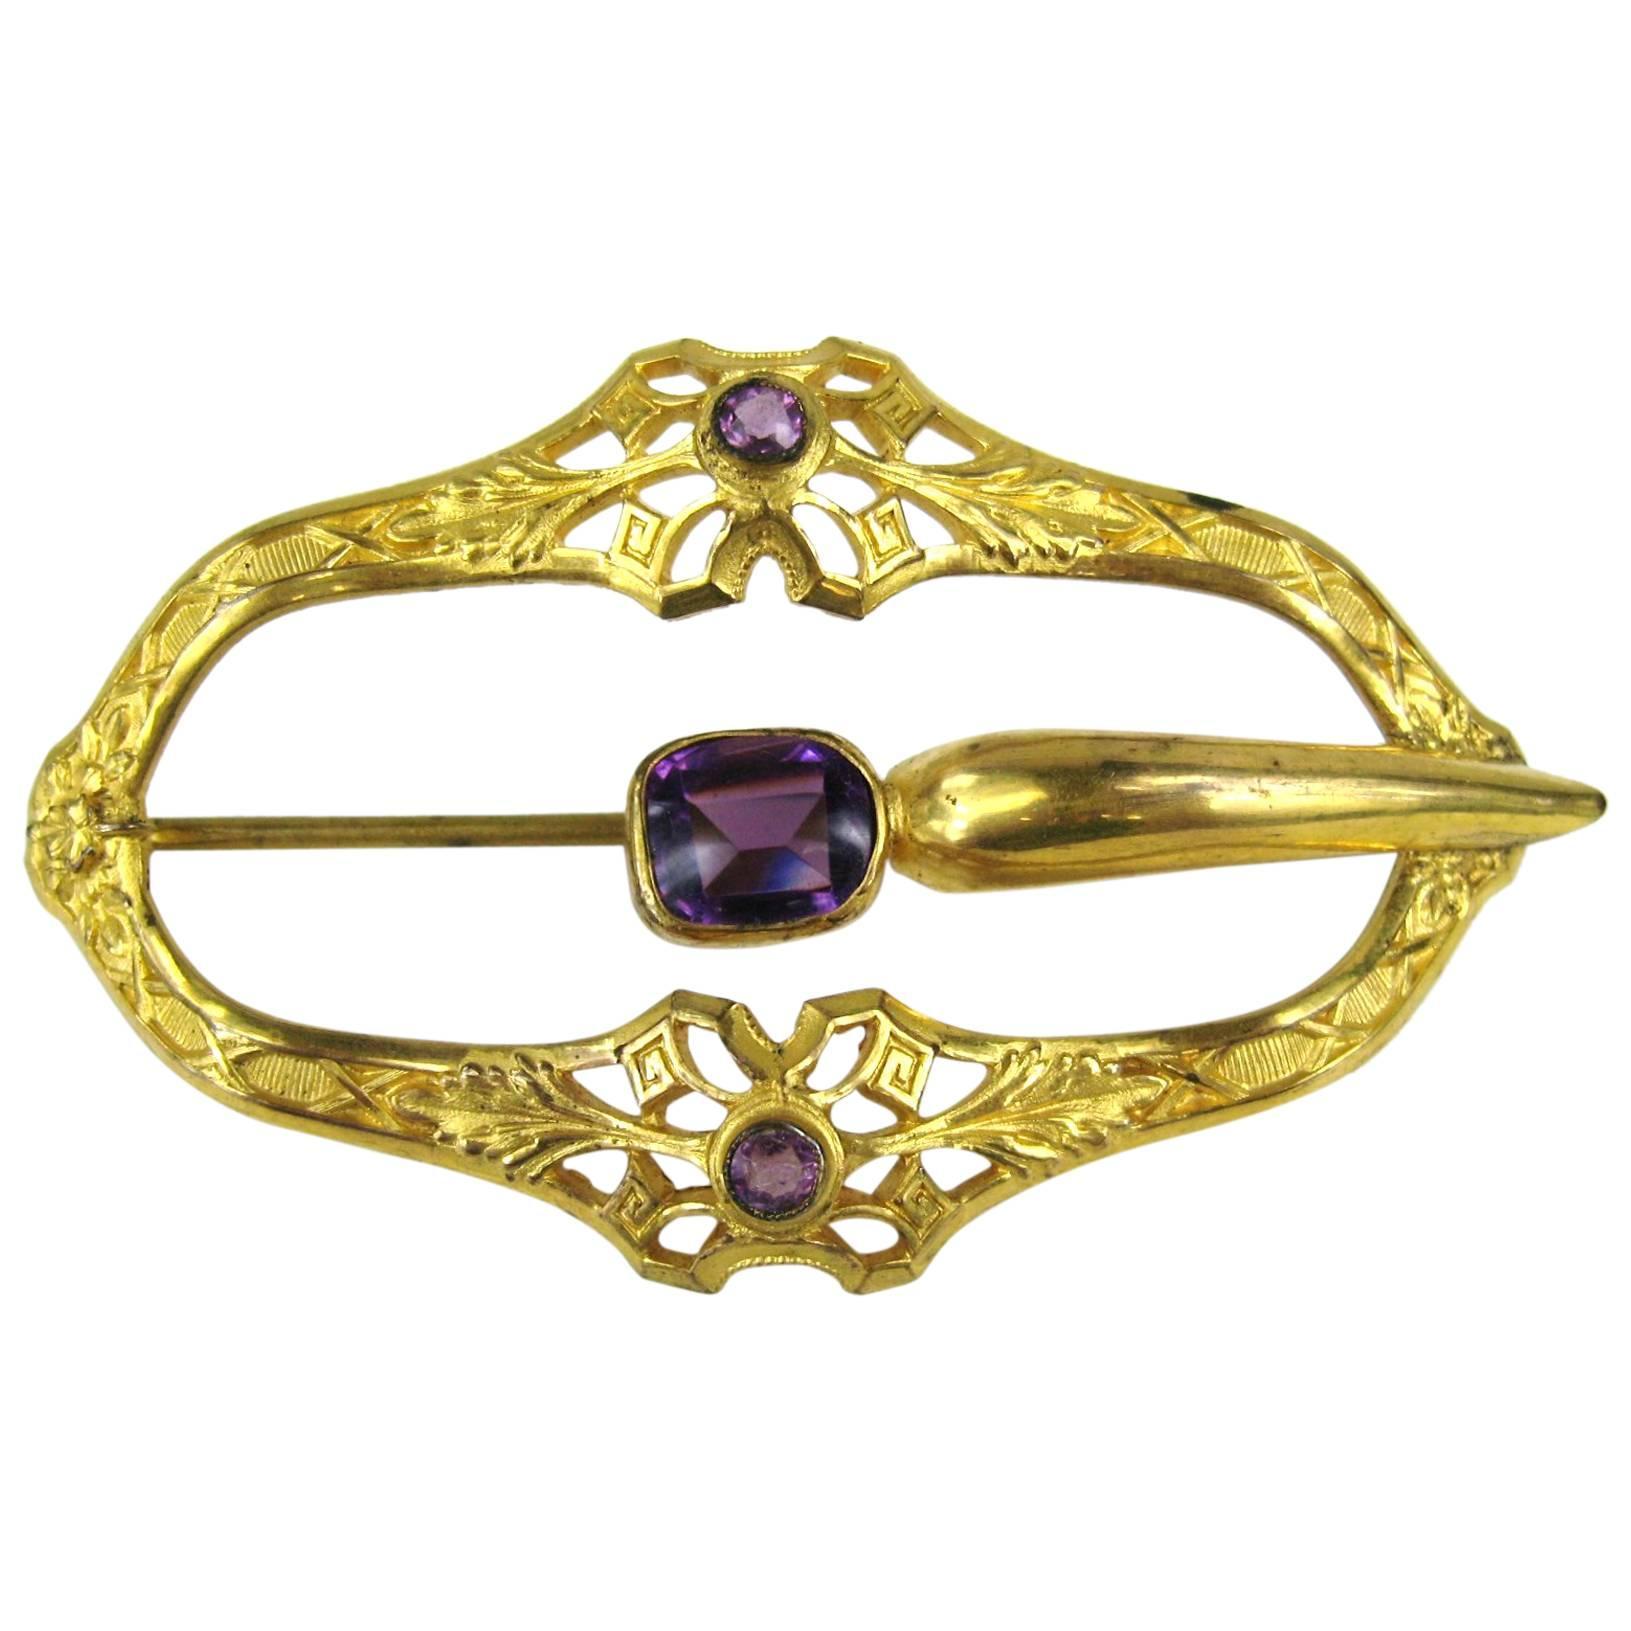 Antique Gold plated Amethyst belt buckle In Good Condition For Sale In Wallkill, NY